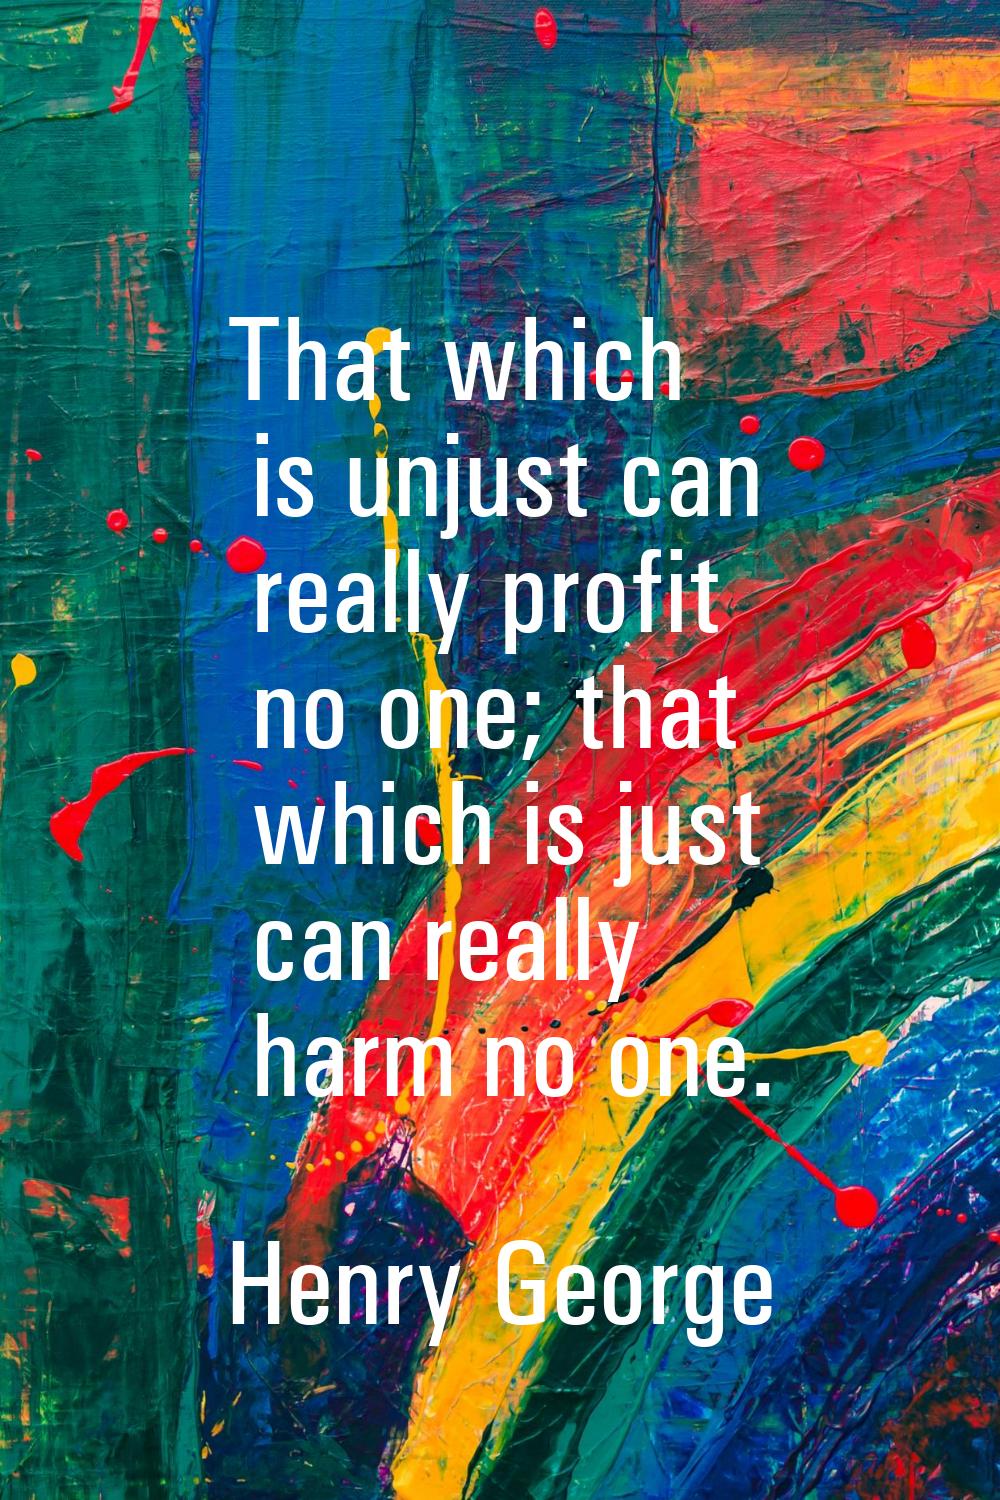 That which is unjust can really profit no one; that which is just can really harm no one.